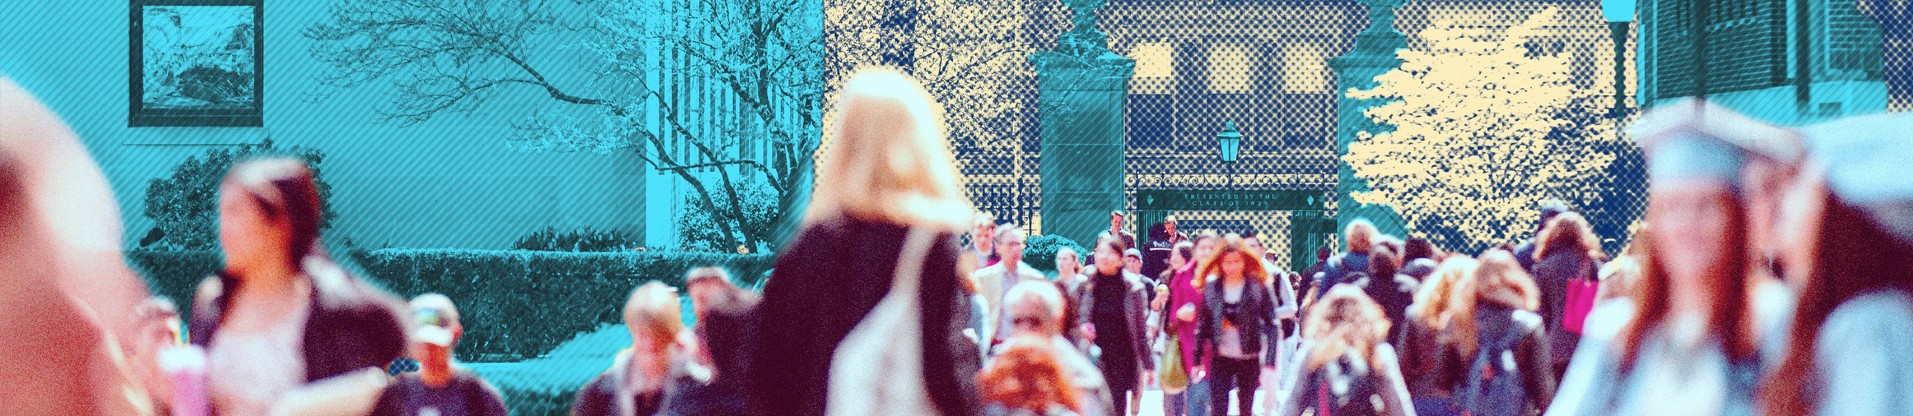 Stylized image of people walking on Columbia's campus.